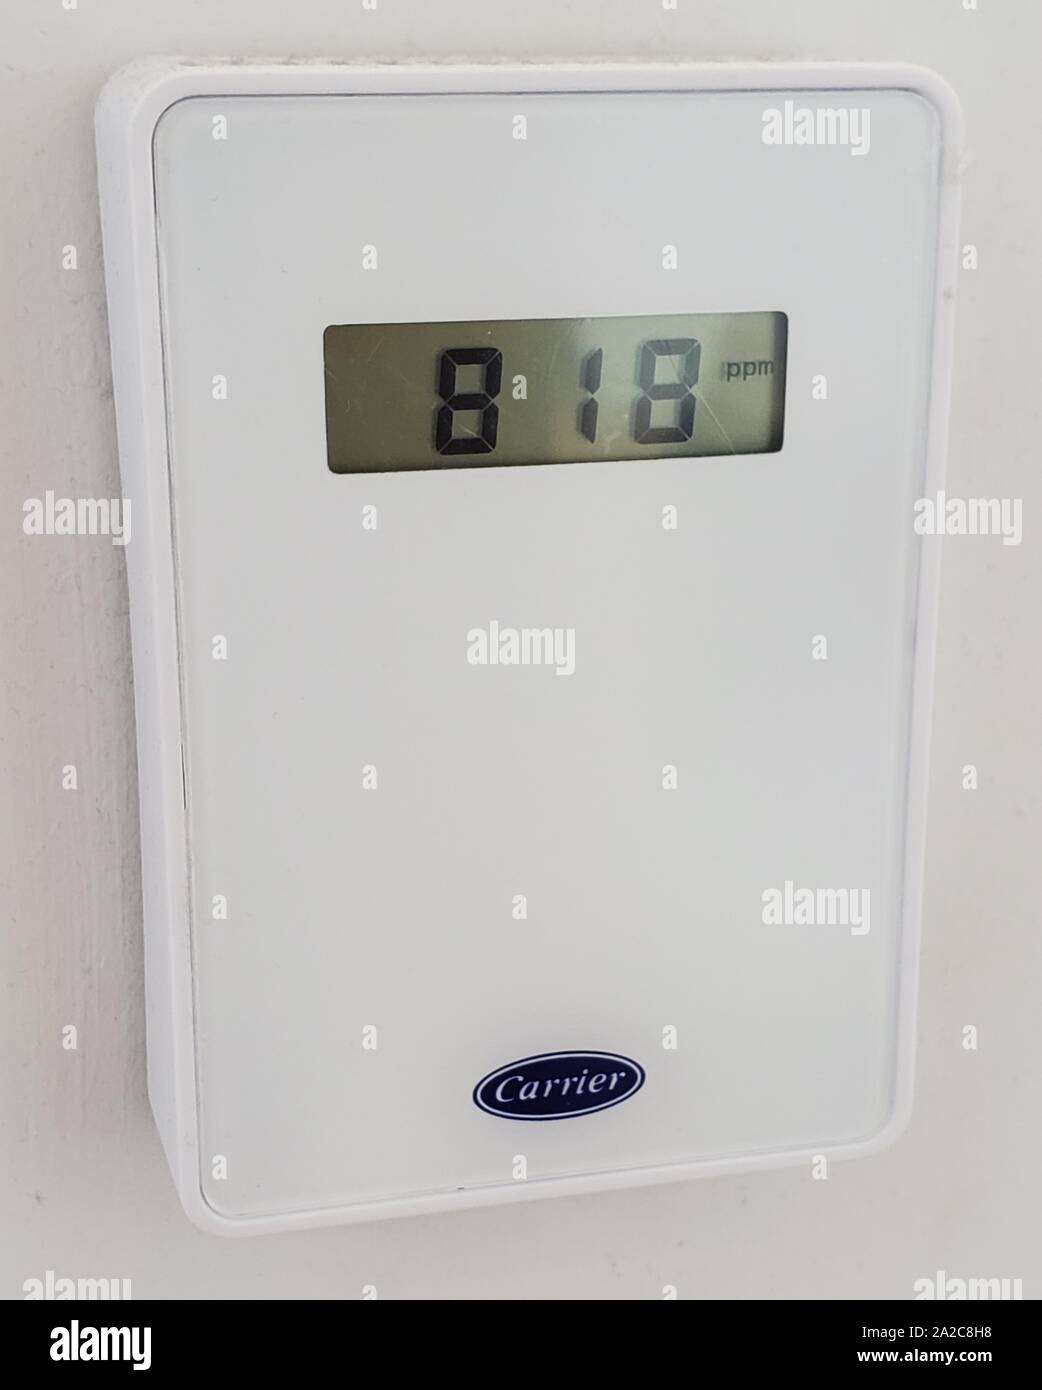 Close-up of Carrier wall mounted Carbon Dioxide (CO2) meter reading 818ppm, part of an intelligent HVAC system designed to allow in limited amounts of outdoor air in order to reduce CO2 buildup in a commercial building while reducing the waste of cool indoor air, Walnut Creek, California, September 2, 2019. () Stock Photo